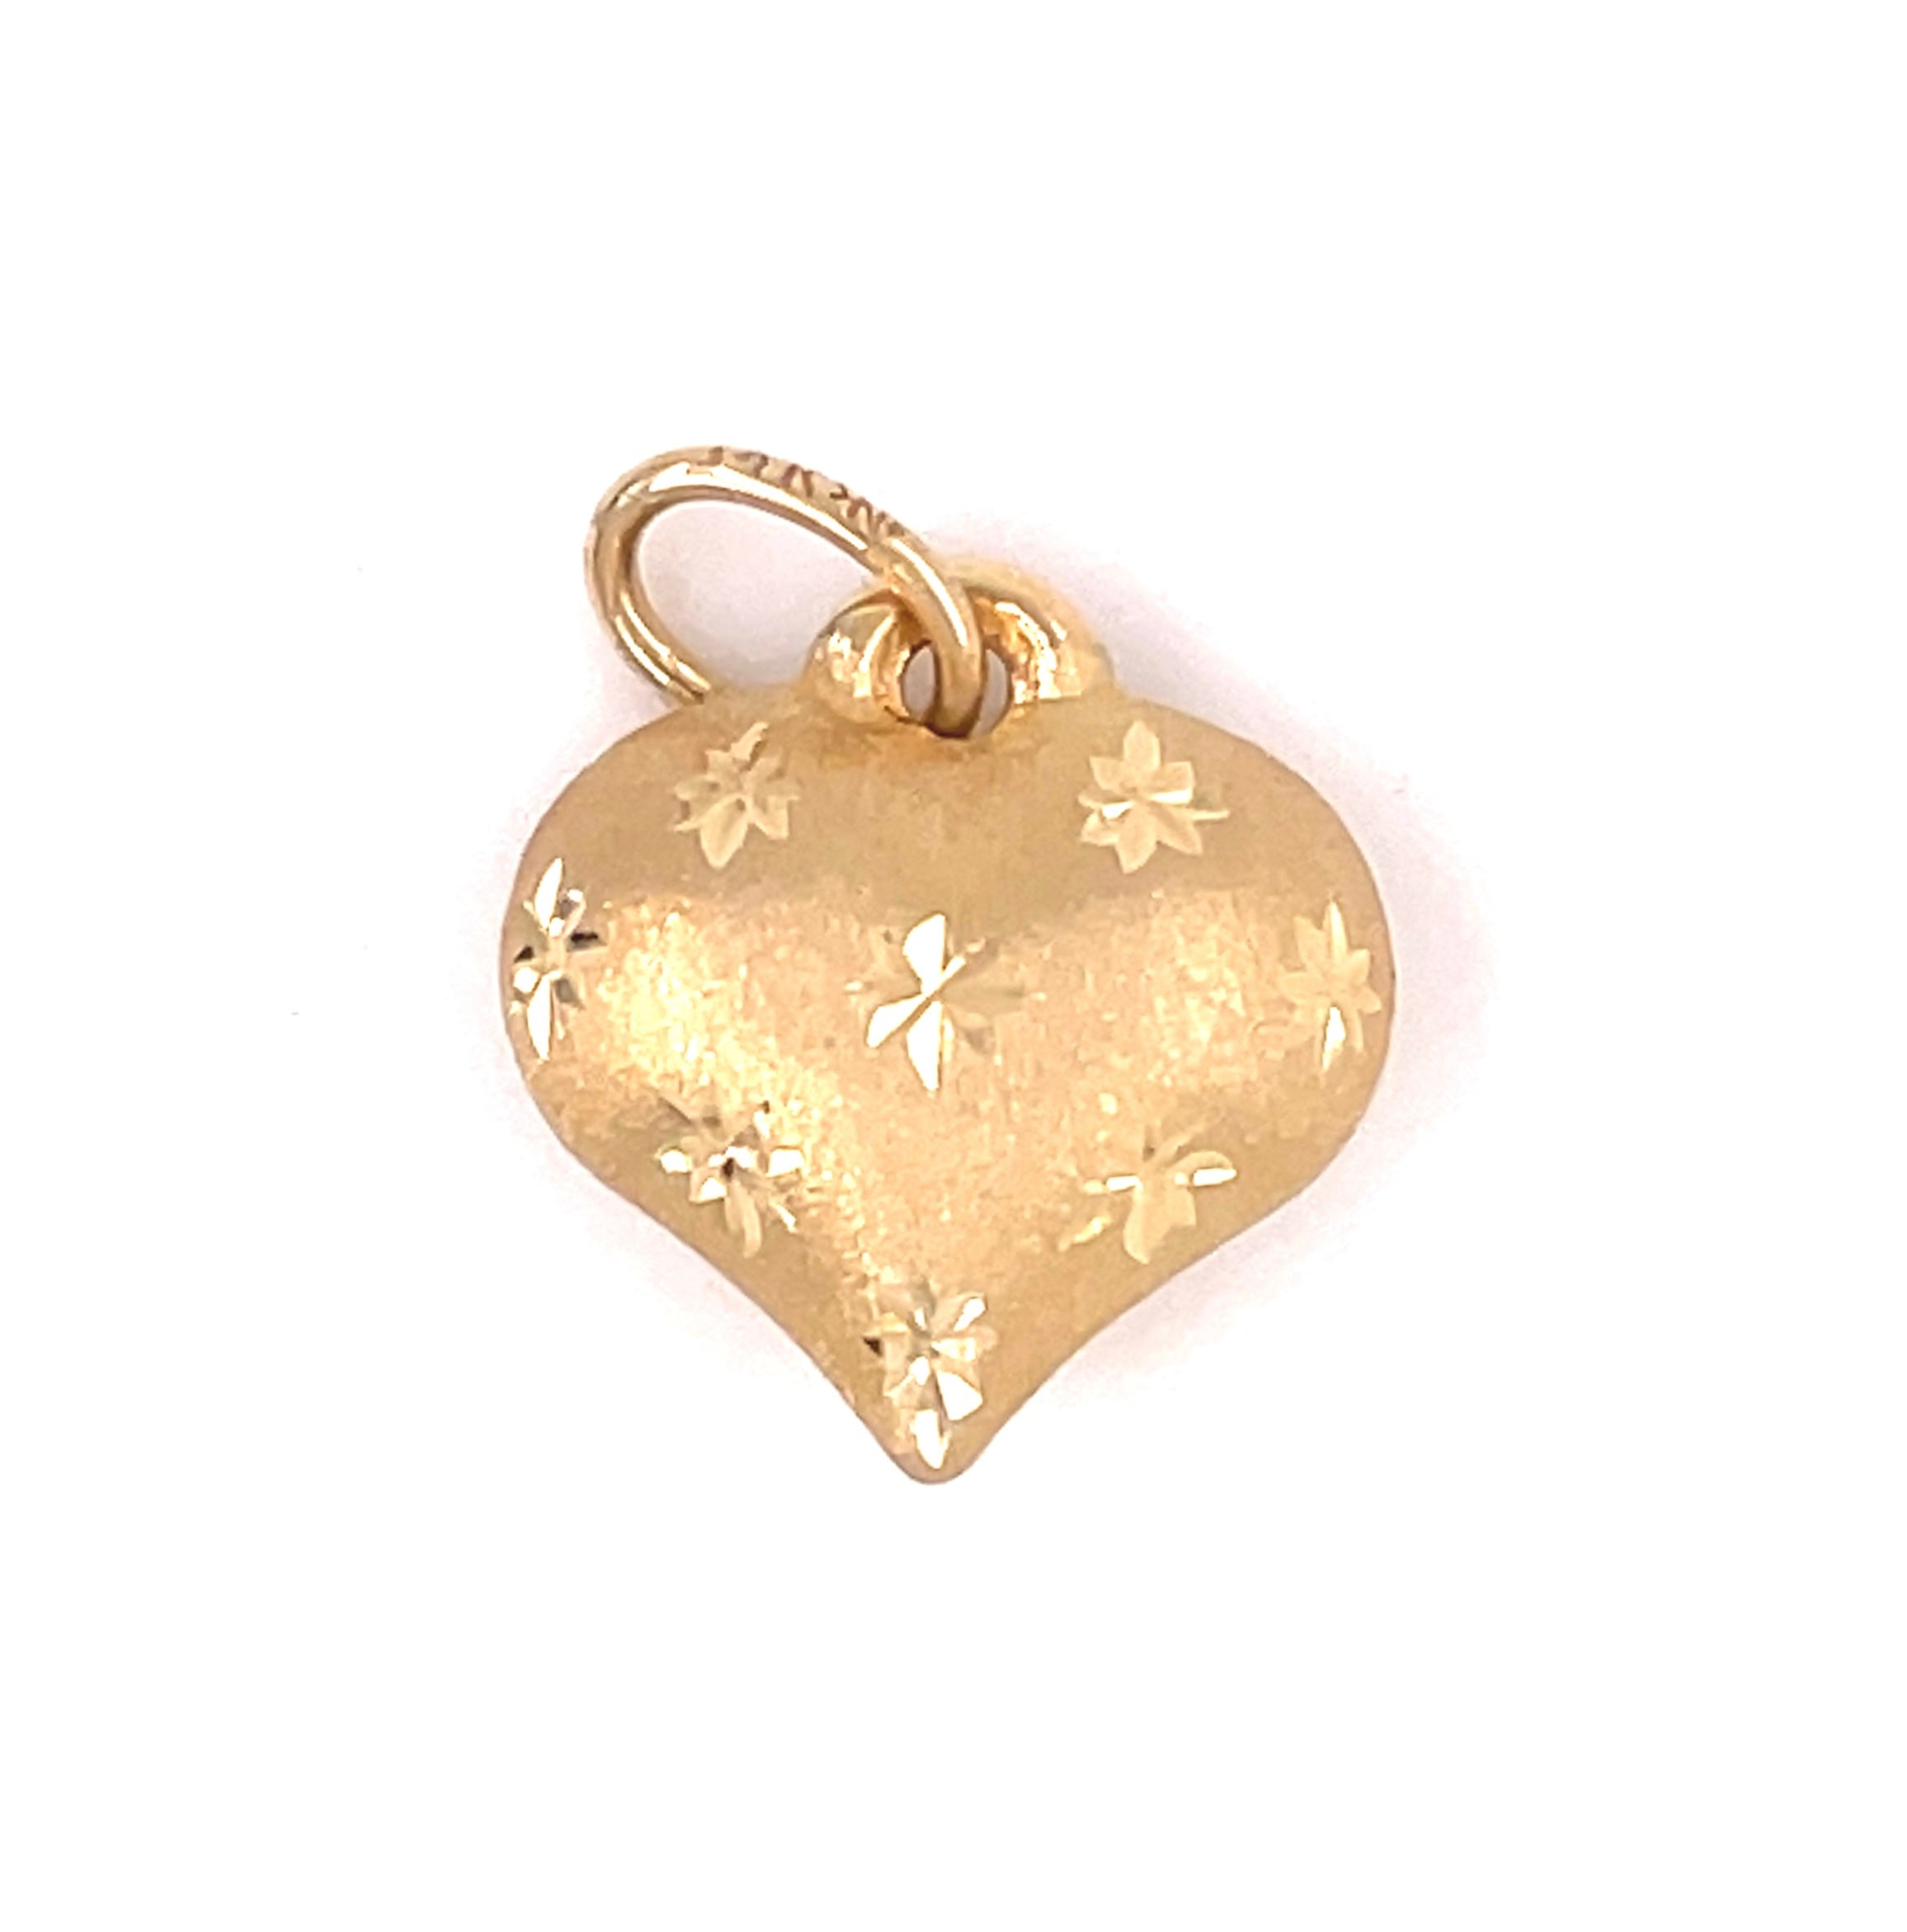 Crafted from 14k yellow gold for maximum durability, this Italian made charm features a puffed heart shape, with a secure bail to create a luxurious look that's perfect for any occasion. Measuring 10.00 mm in length, this timeless piece is sure to add a touch of elegance to your collection.